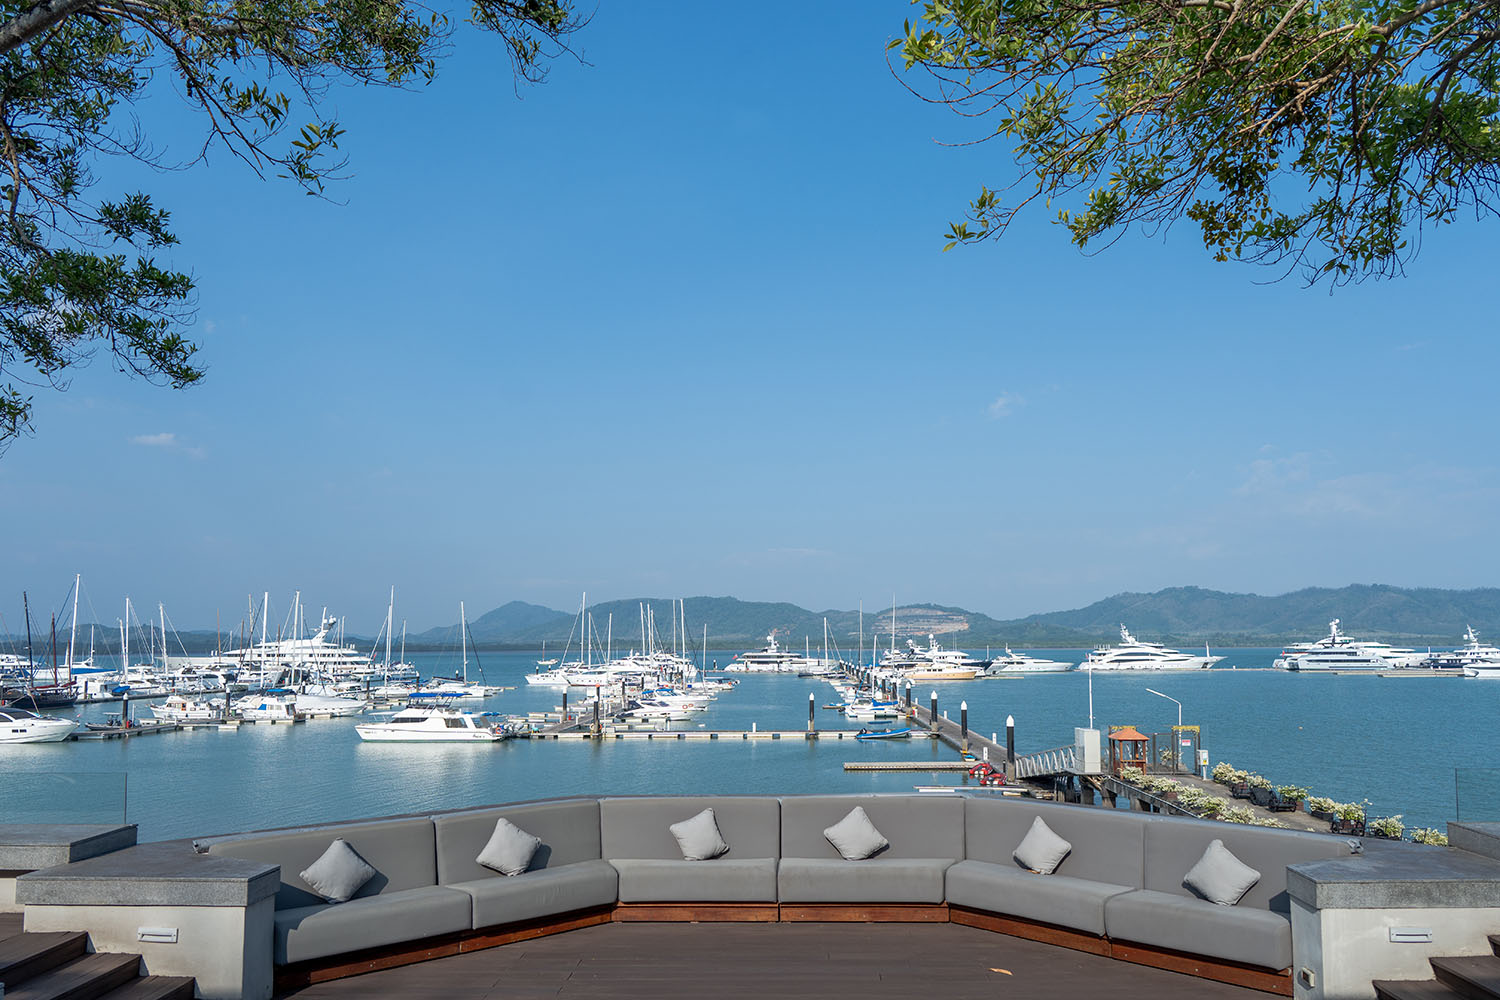 Thailand International Boat Show targets expansion with move to Phuket Yacht Haven in 2025